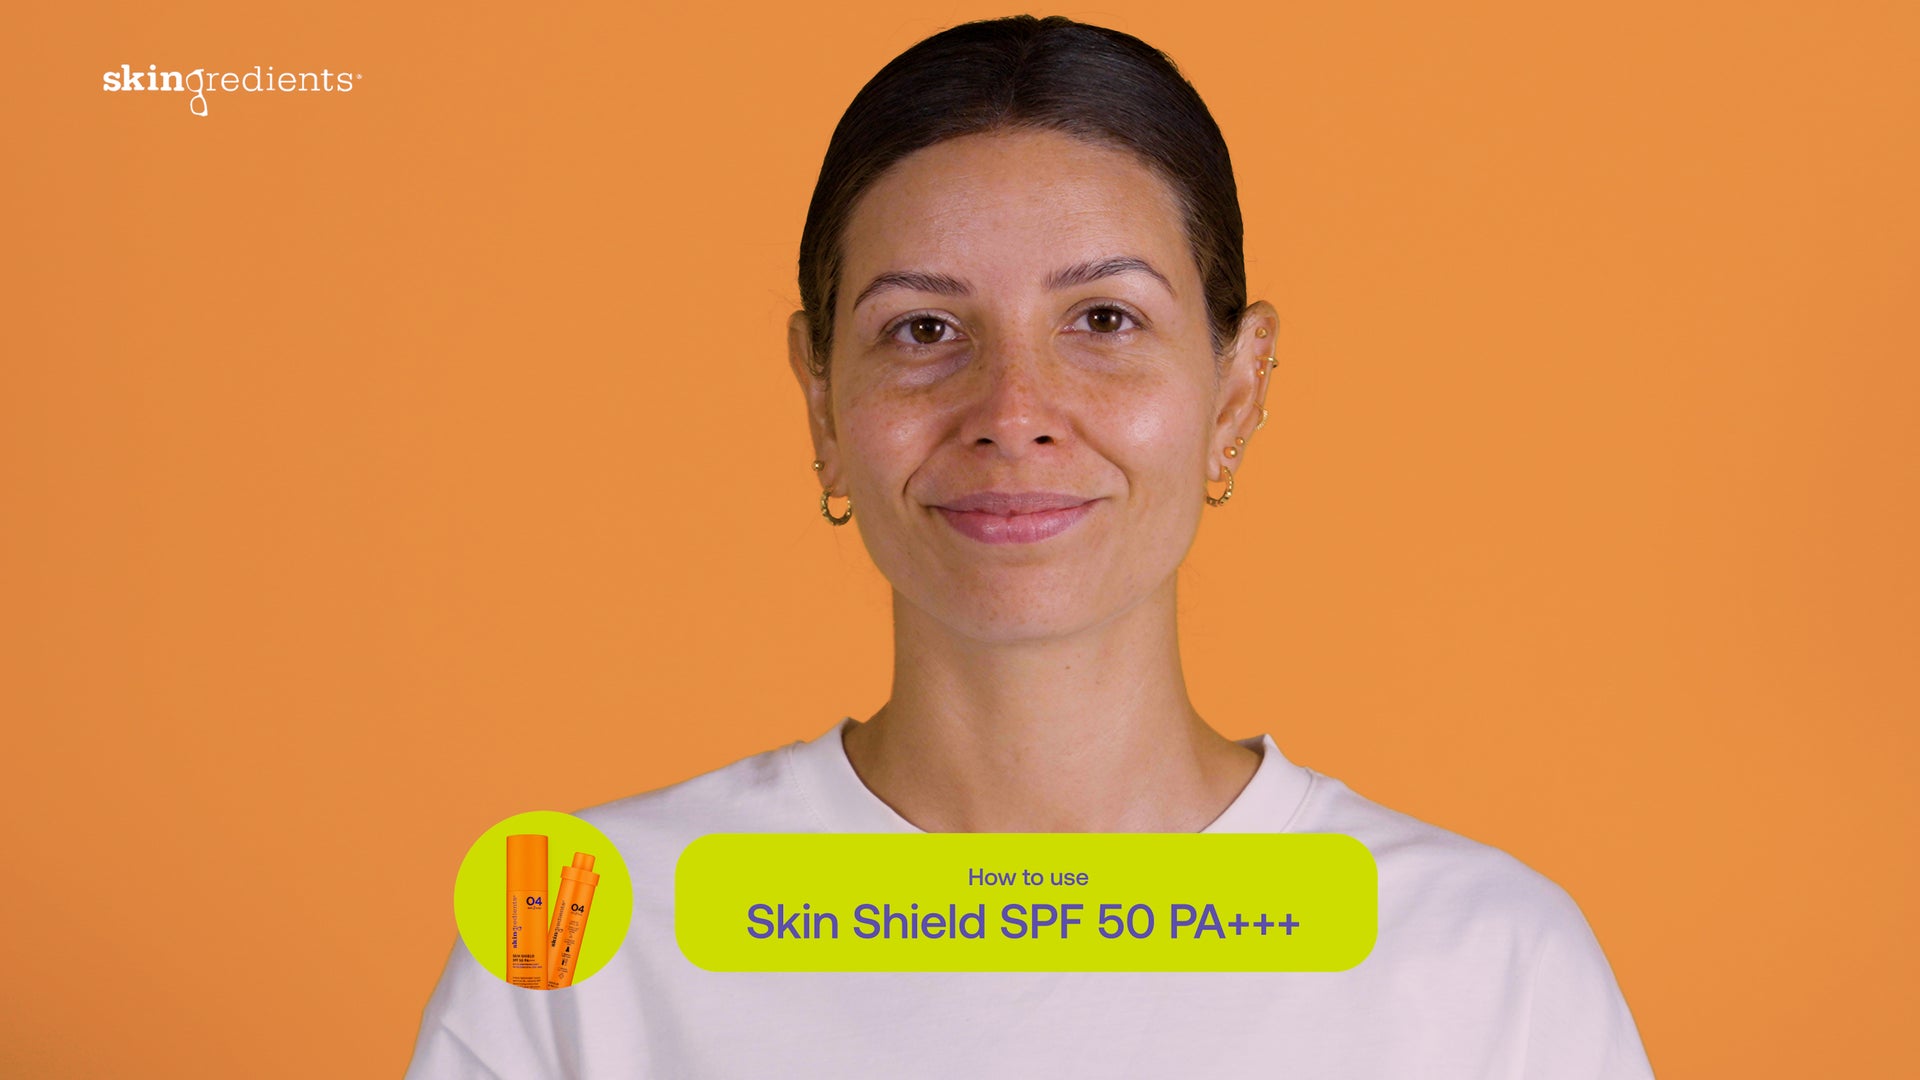 Load video: &lt;p&gt;A Skin Shield SPF 50 lover? Shop + save with this loyalty bundle containing your Skin Shield Moisturising + Priming SPF 50 PA+++ refill &lt;strong&gt;PLUS A FREE REFILL!&lt;/strong&gt;&lt;/p&gt;
&lt;p&gt;&lt;strong&gt;This bundle includes:&lt;/strong&gt;&lt;br&gt;&lt;/p&gt;
&lt;p&gt;&lt;strong&gt;x2 Skin Shield Moisturising + Priming SPF 50 PA+++ refills. &lt;/strong&gt;Skingredients® Skin Shield SPF 50 PA+++ (73ml – this jumbo size will last you!) is your multi award-winning, broad-spectrum SPF that’ll protect your skin + lightly moisturise, while imparting a dewy finish + peachy tint. Our SPF has a legion of fans including expert makeup artists that adore its dewy finish and glow, glow, glow!&lt;br&gt;The 04 in our KeyFour range – Skin Shield is the ESSENTIAL final step in every AM skin recipe! Sitting perfectly under makeup with zero pill, it’s your lightweight mineral parasol that’ll shield (wink, wink) your skin from damaging UVA + UVB rays, blue light (aka HEV light) emitted from the sun + our screens, pollution and infrared. The ideal priming base, recently described by Youtuber + Makeup Artist Wayne Goss as “the holy grail of sunscreens.”&lt;/p&gt;
&lt;p&gt;For added skin benefits (because we don’t do anything by halves), you’ll find niacinamide – otherwise known as vitamin B3 – and vitamin E for the antioxidant protection against pesky environmental aggressors. Plus, trust the moisturising addition of allantoin to smooth the skin. It is non-comedogenic, oil-free, water-resistant and non-greasy, and what’s more, there’s no need to stress about a chalky white cast and photo flashback.&lt;/p&gt;
&lt;p&gt;&lt;strong&gt;NERDIE NOTE:&lt;/strong&gt; YOU MUST HAVE PURCHASED YOUR PRIMARY PACK BEFORE SWITCHING TO OUR VALUE-SAVING PLANET-FRIENDLY REFILLS!&lt;/p&gt;
&lt;p&gt;&lt;em&gt;&lt;strong&gt;*Please note, the products included in this bundle have an expiry date of November 2024.&lt;/strong&gt;&lt;/em&gt;&lt;/p&gt;